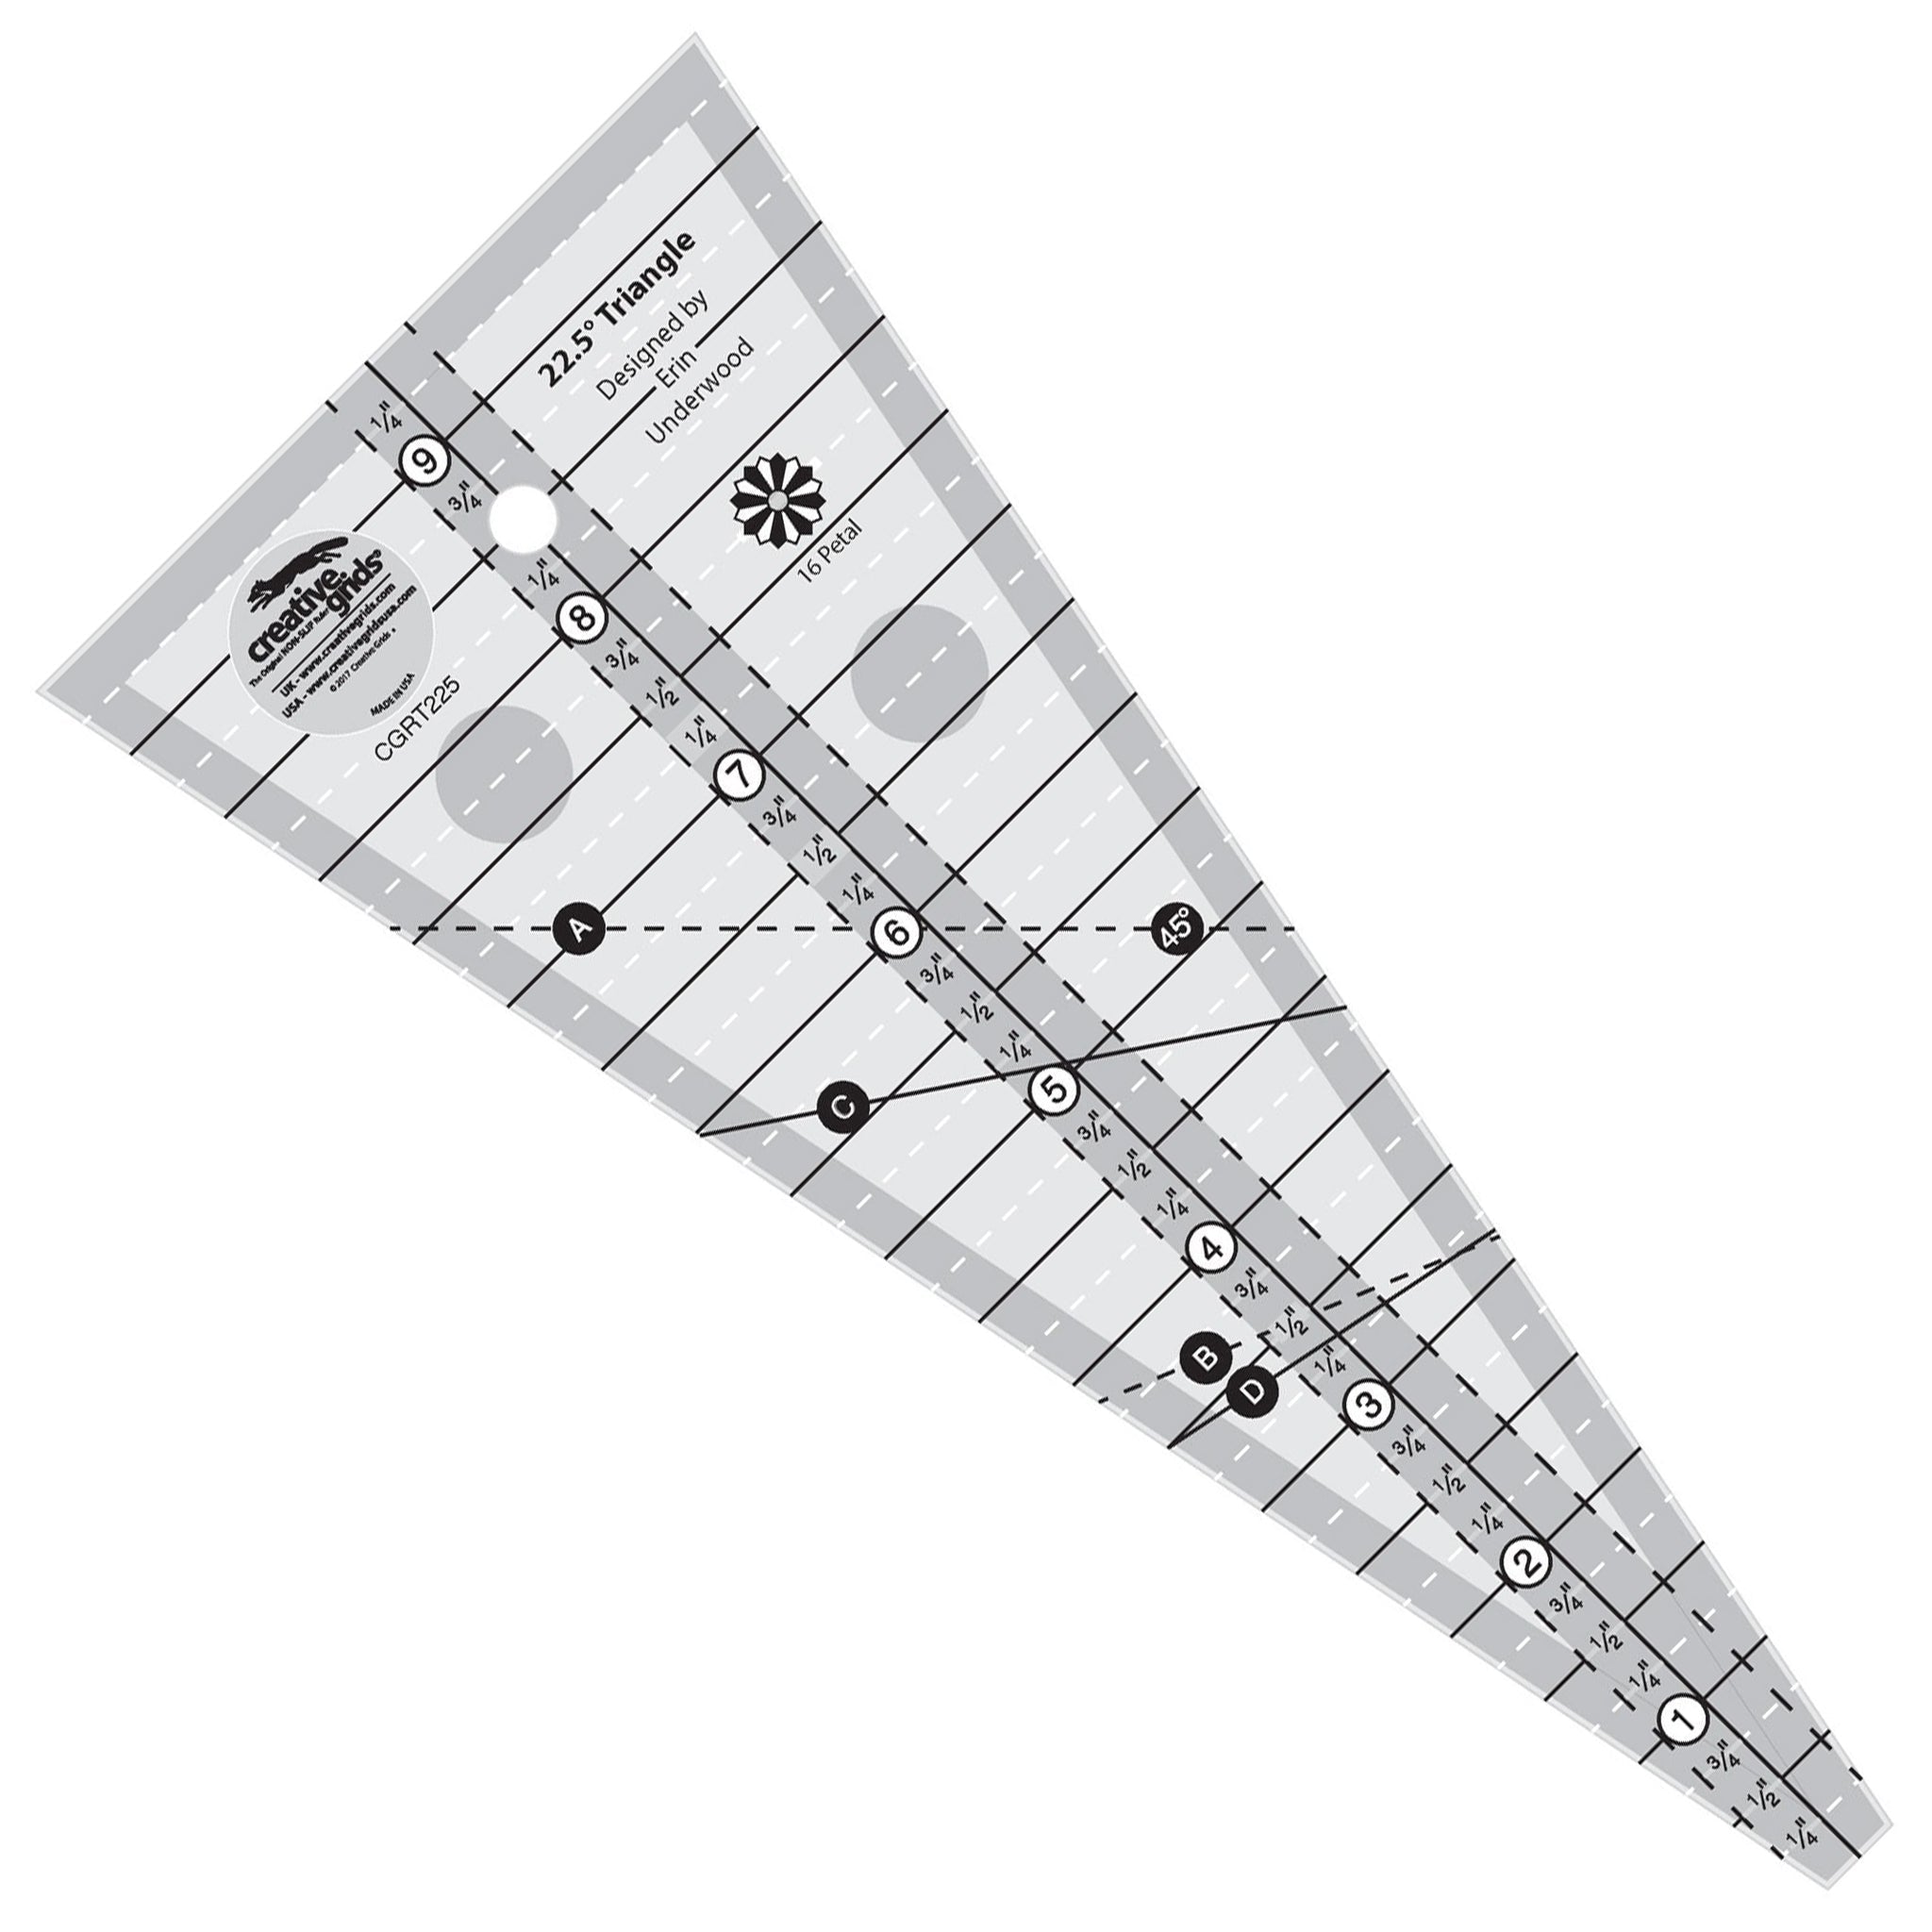 Creative Grids 22-1/2 Degree Triangle Quilt Ruler (CGRT225)